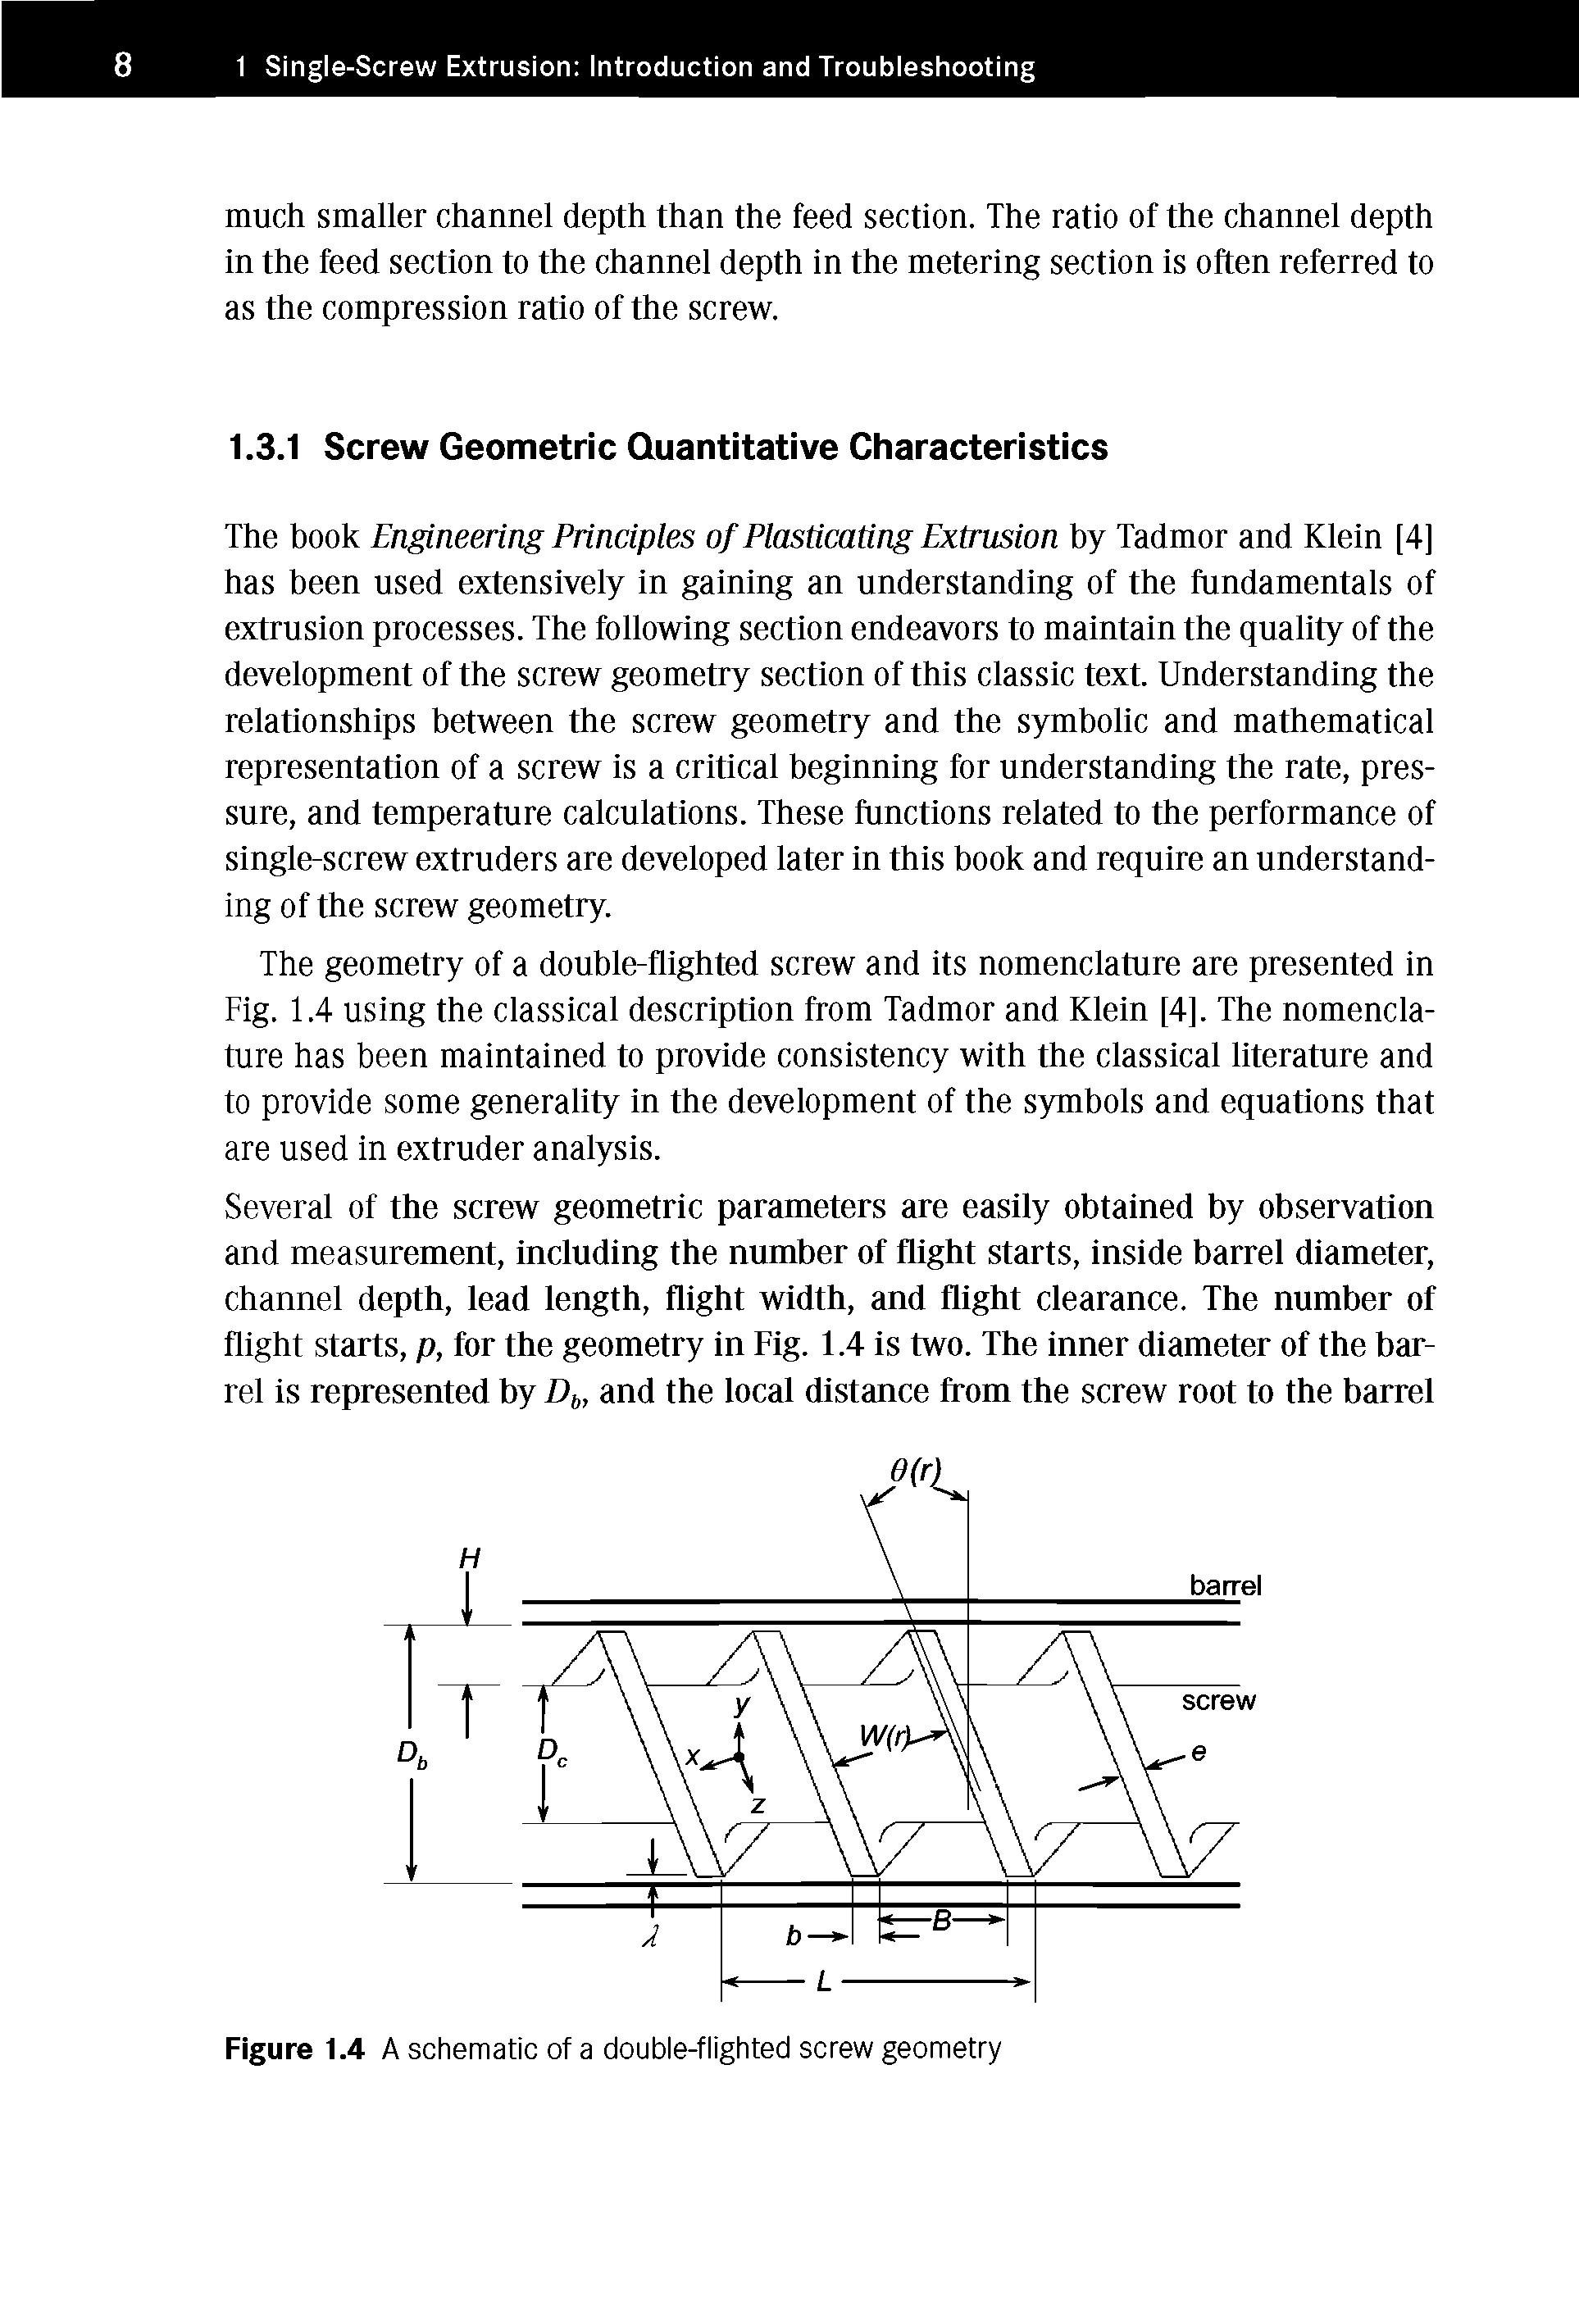 Figure 1.4 A schematic of a double-flighted screw geometry...